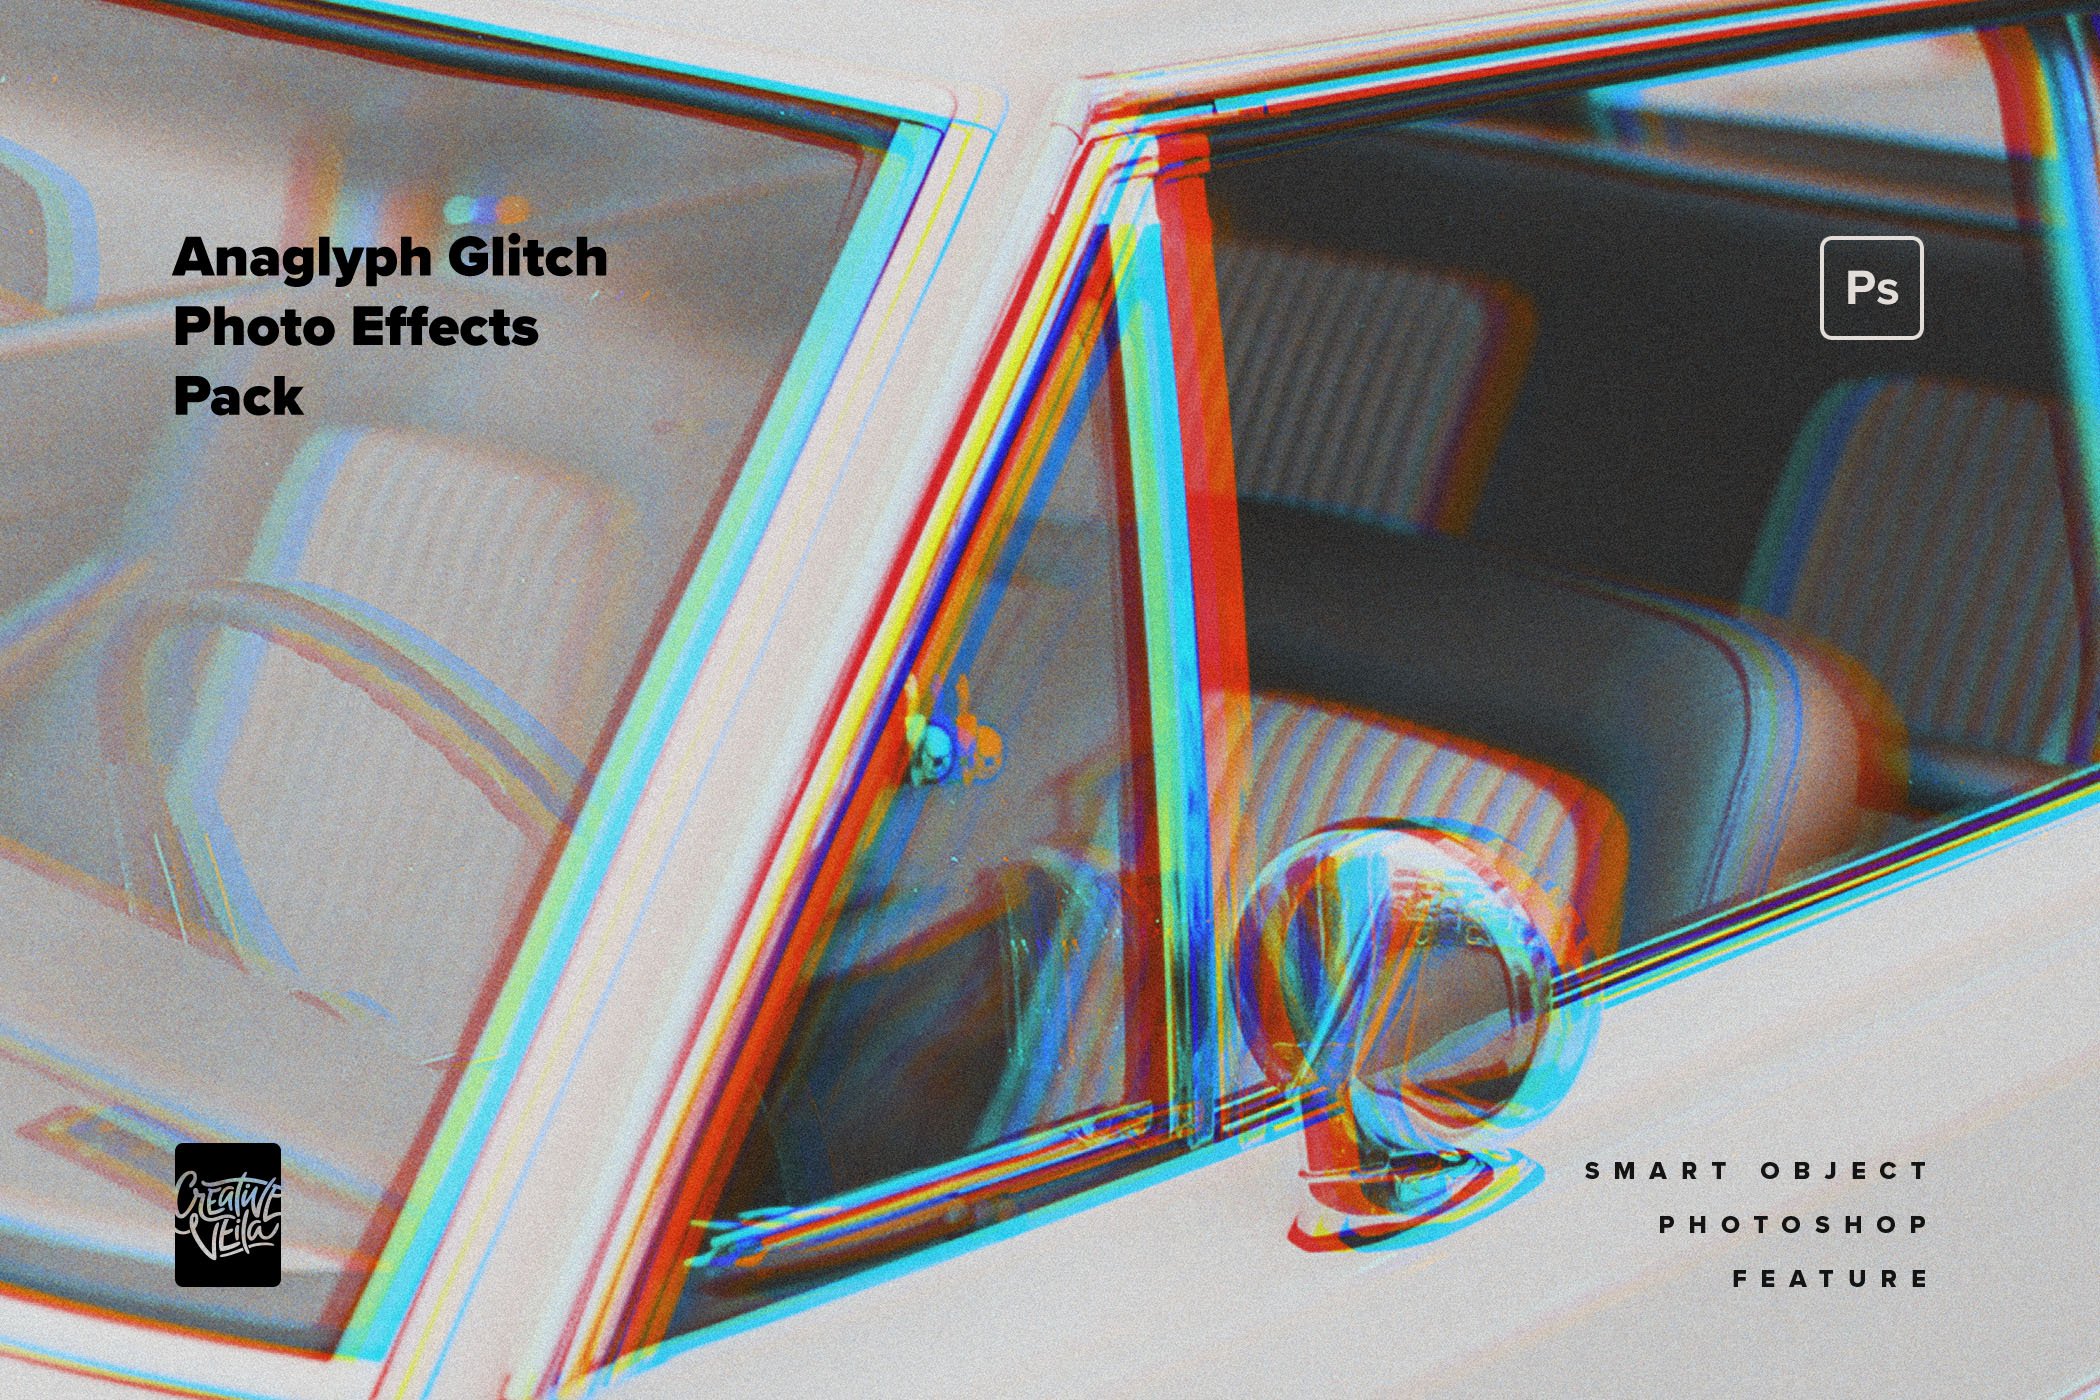 anaglyph glitch photo effects pack by creative veila 02 110